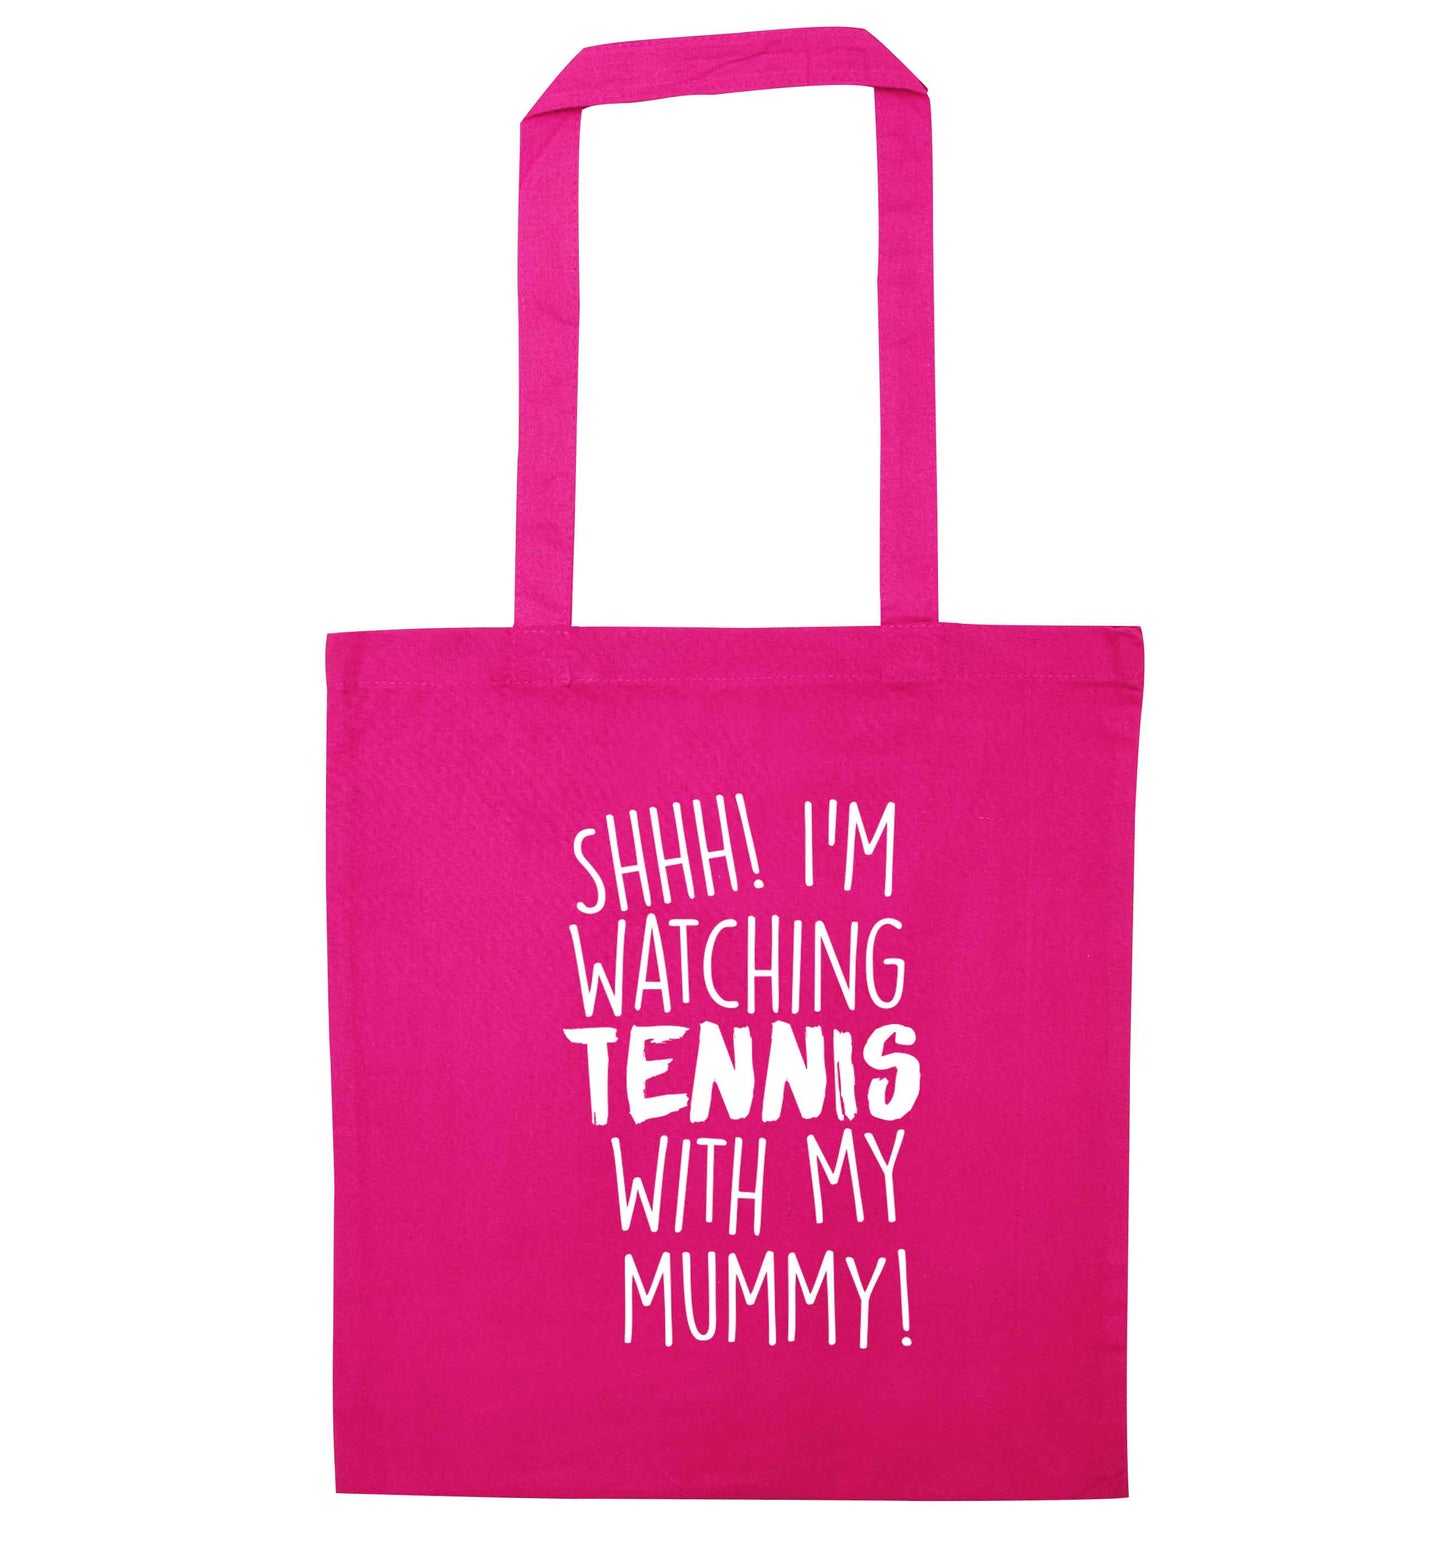 Shh! I'm watching tennis with my mummy! pink tote bag